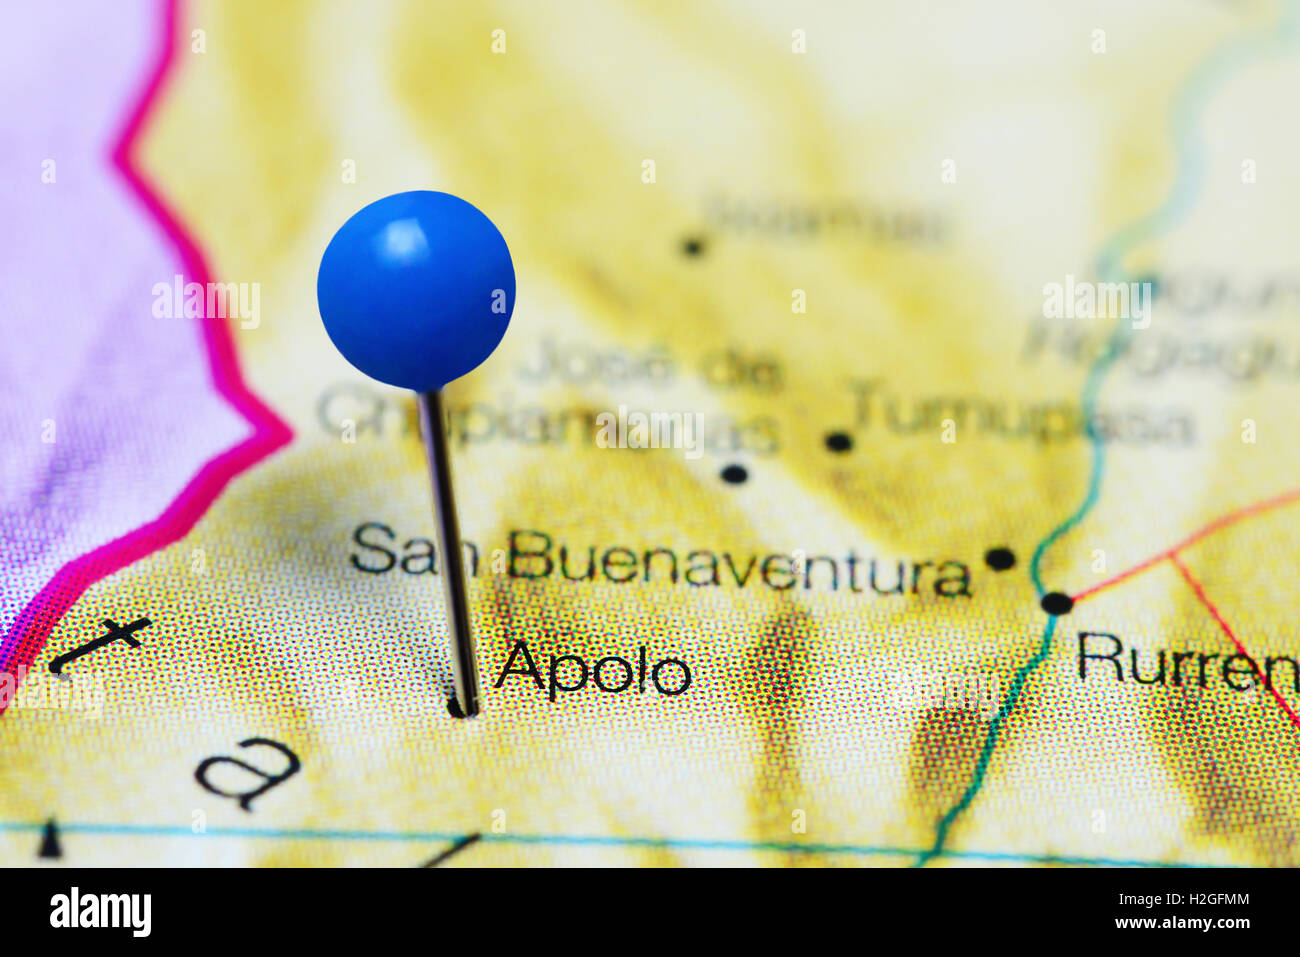 Apolo pinned on a map of Bolivia Stock Photo